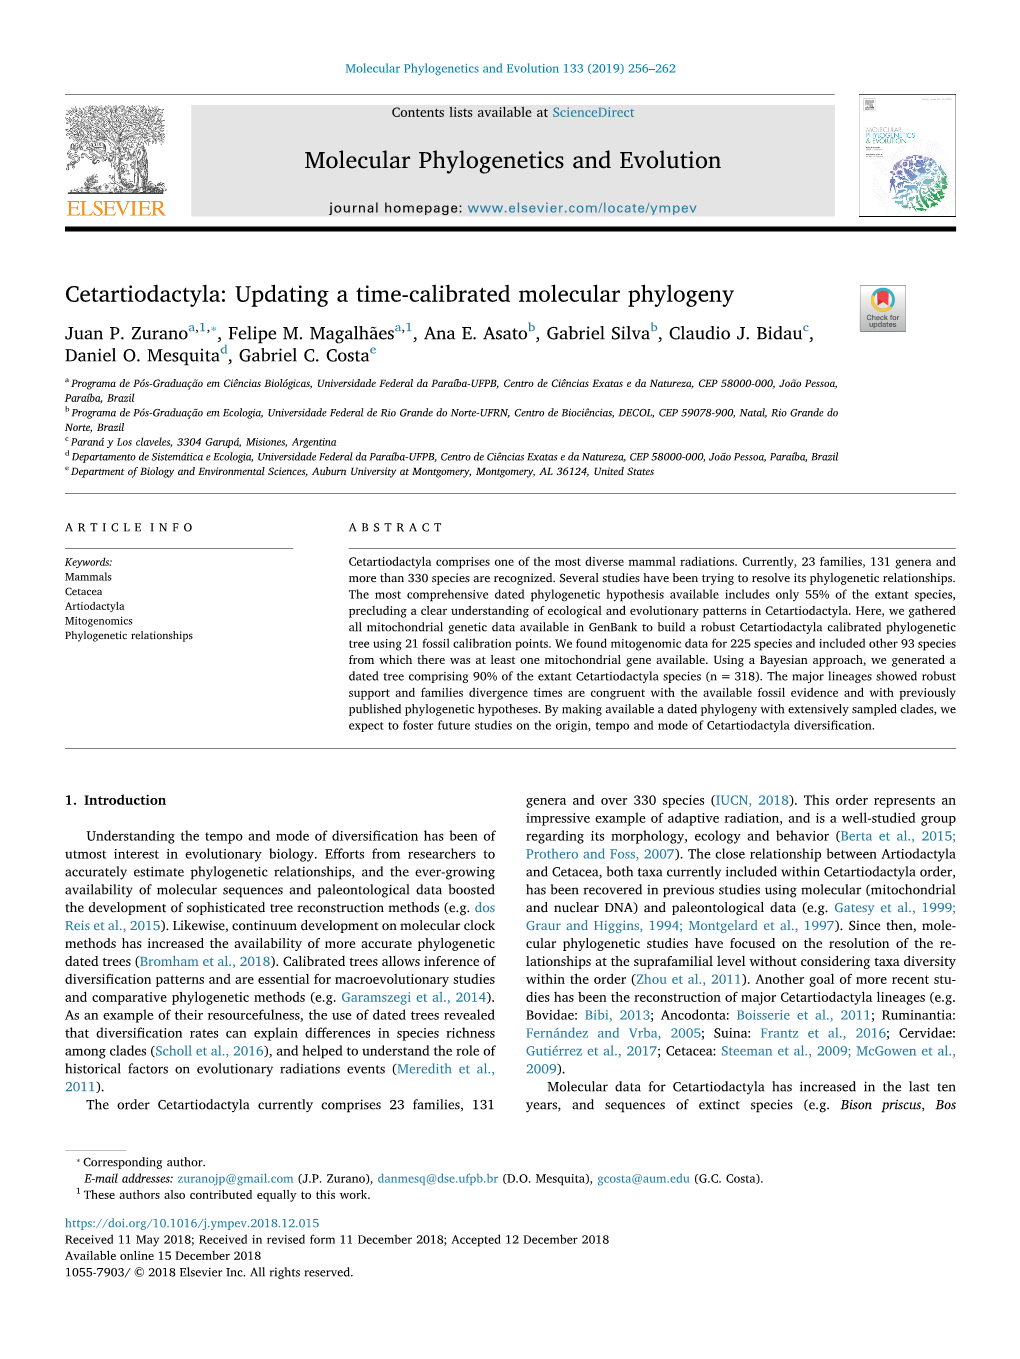 Cetartiodactyla Updating a Time-Calibrated Molecular Phylogeny